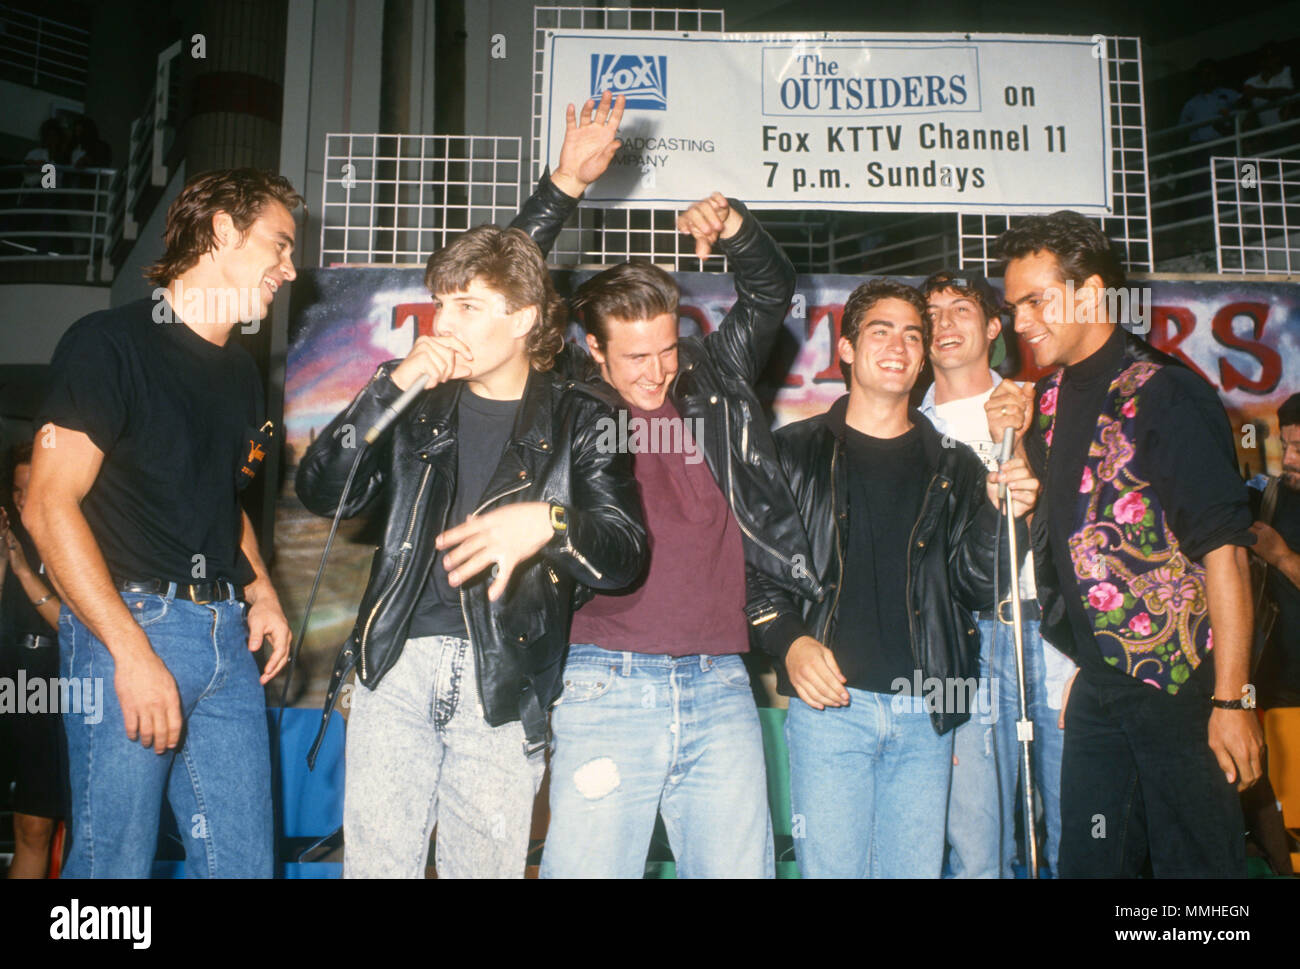 SHERMAN OAKS, CA - MAY 19: Actors Boyd Kestner,  Jay R. Ferguson, David Arquette, Rodney Harvey, David Arquette, Harold Pruett and Robert Rusler attend event for 'The Outsiders' television series at Sherman Oaks Galleria on May 19, 1990 in Sherman Oaks, California. Photo by Barry King/Alamy Stock Photo Stock Photo